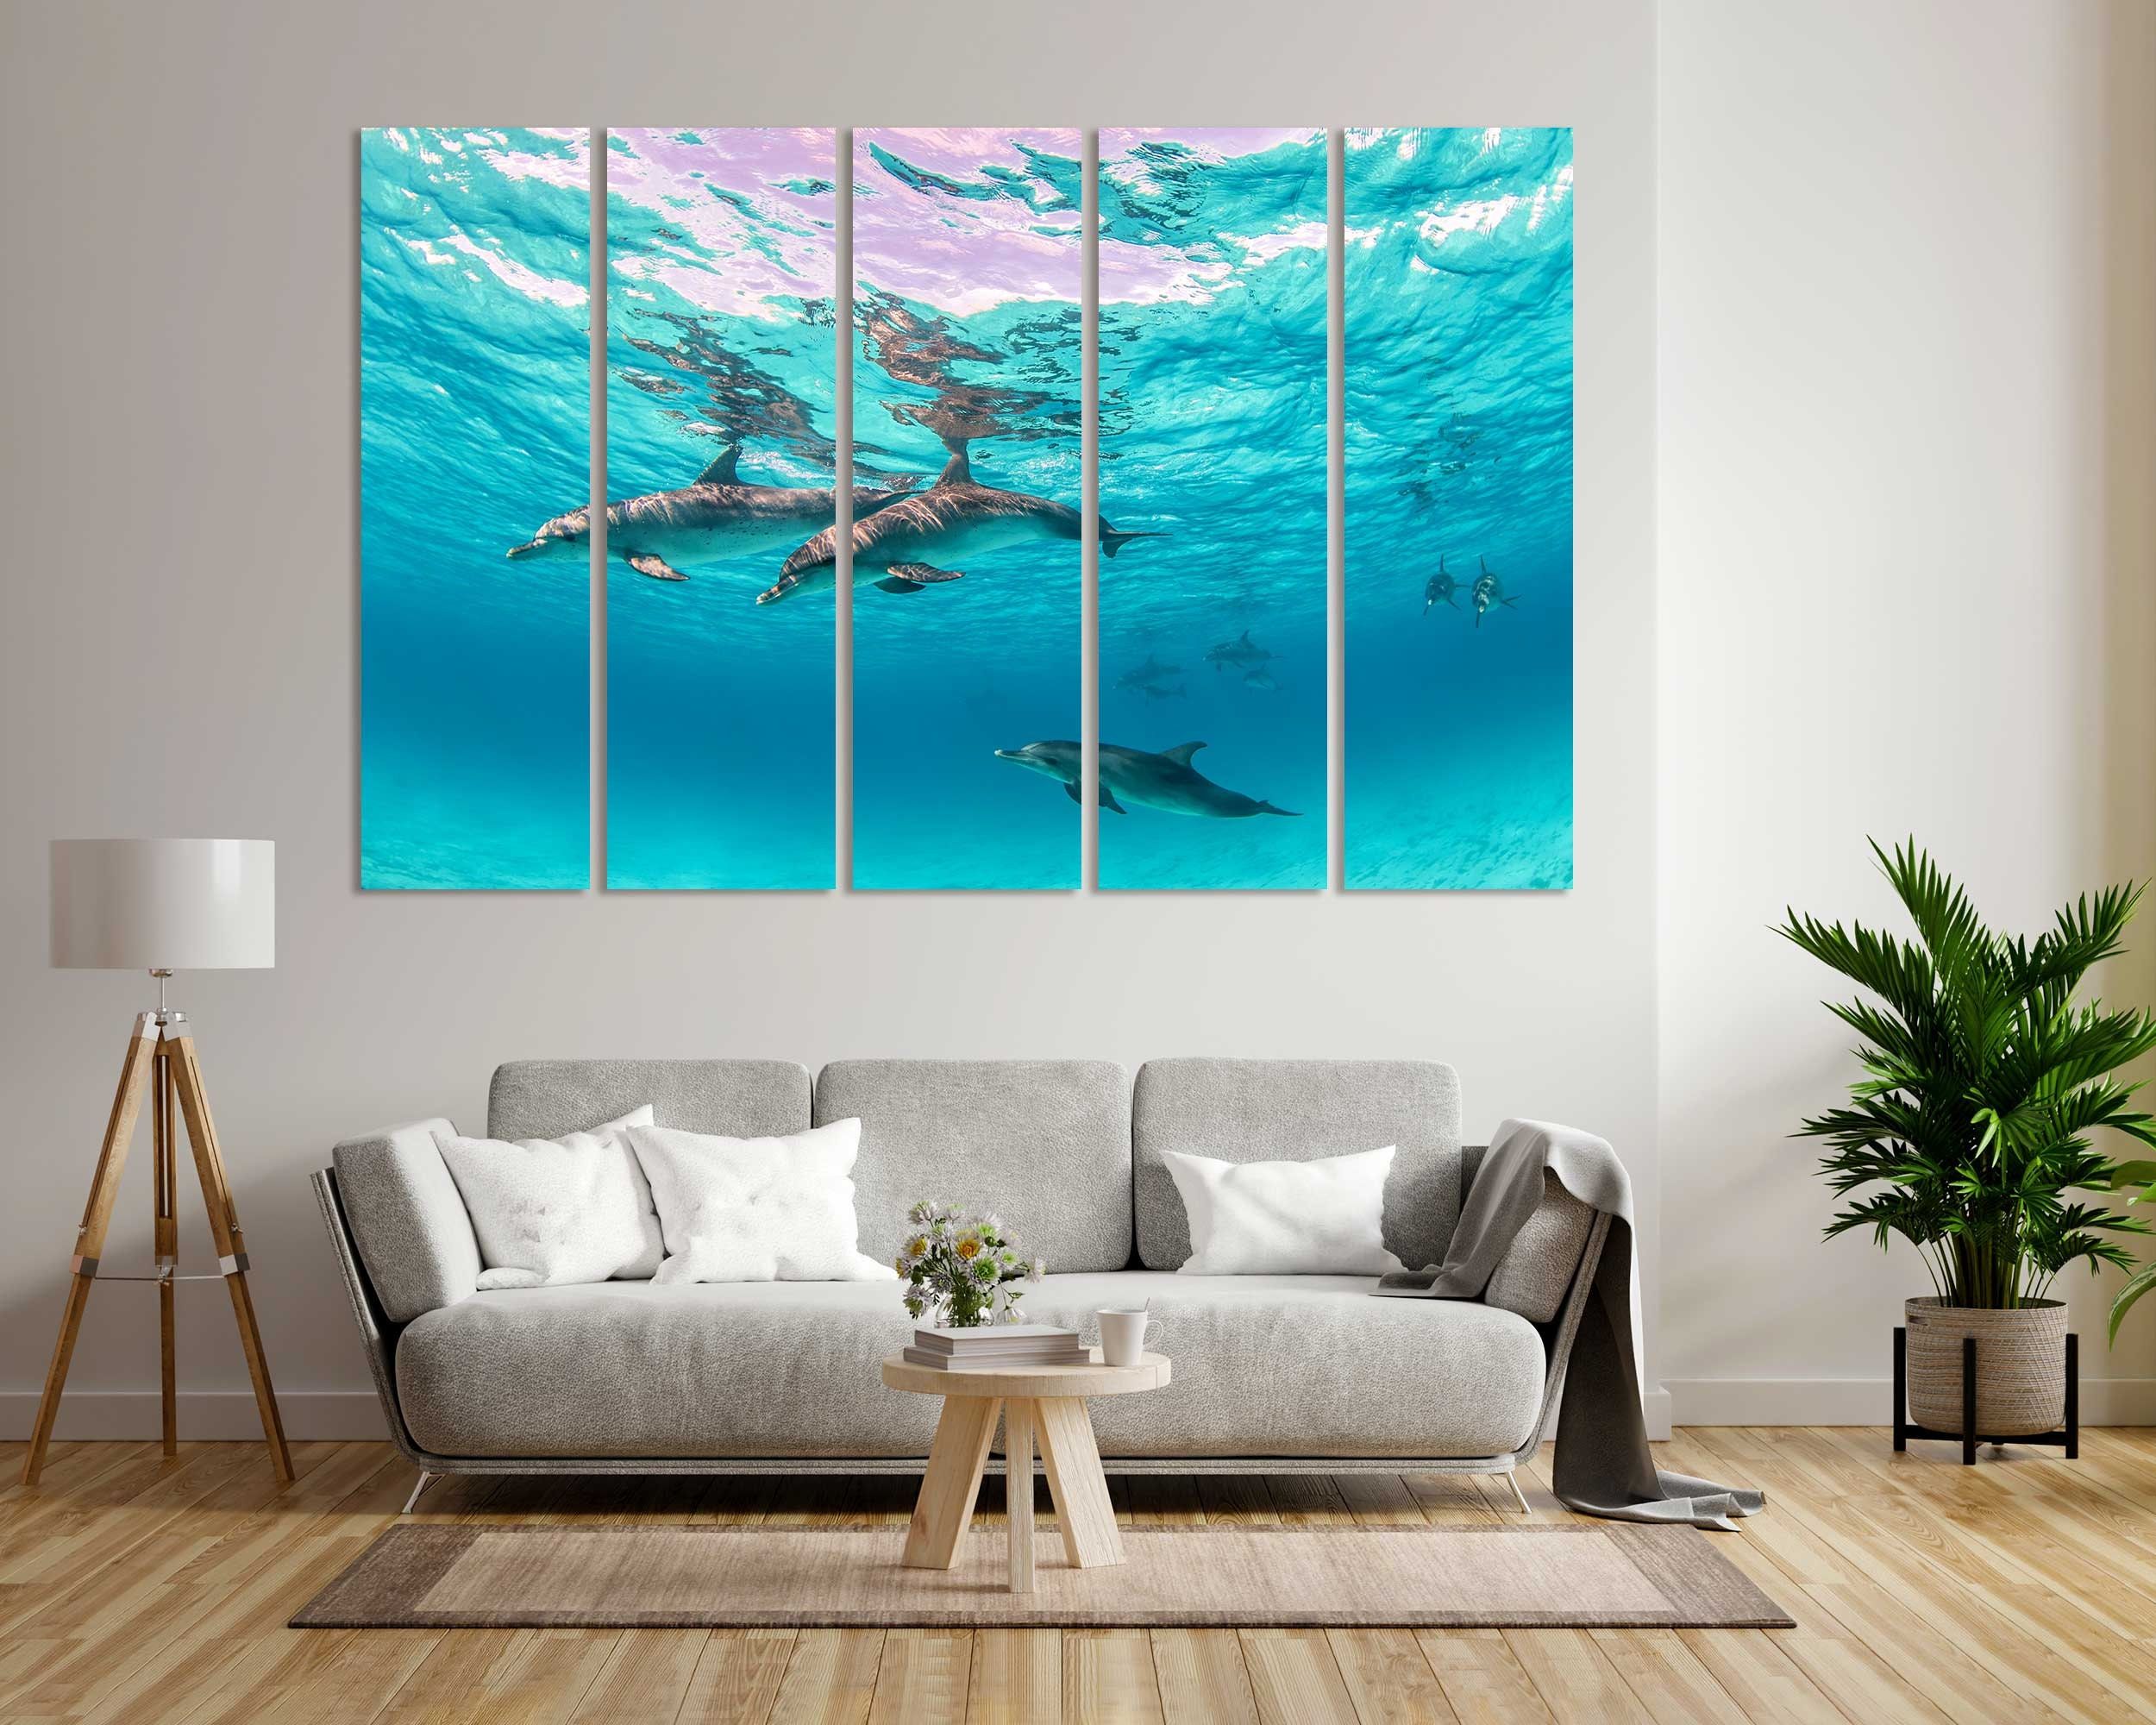 Cute Dolphins Underwater Original Art For Interior Decor Sea – Etsy In Underwater Wood Wall Art (View 12 of 15)